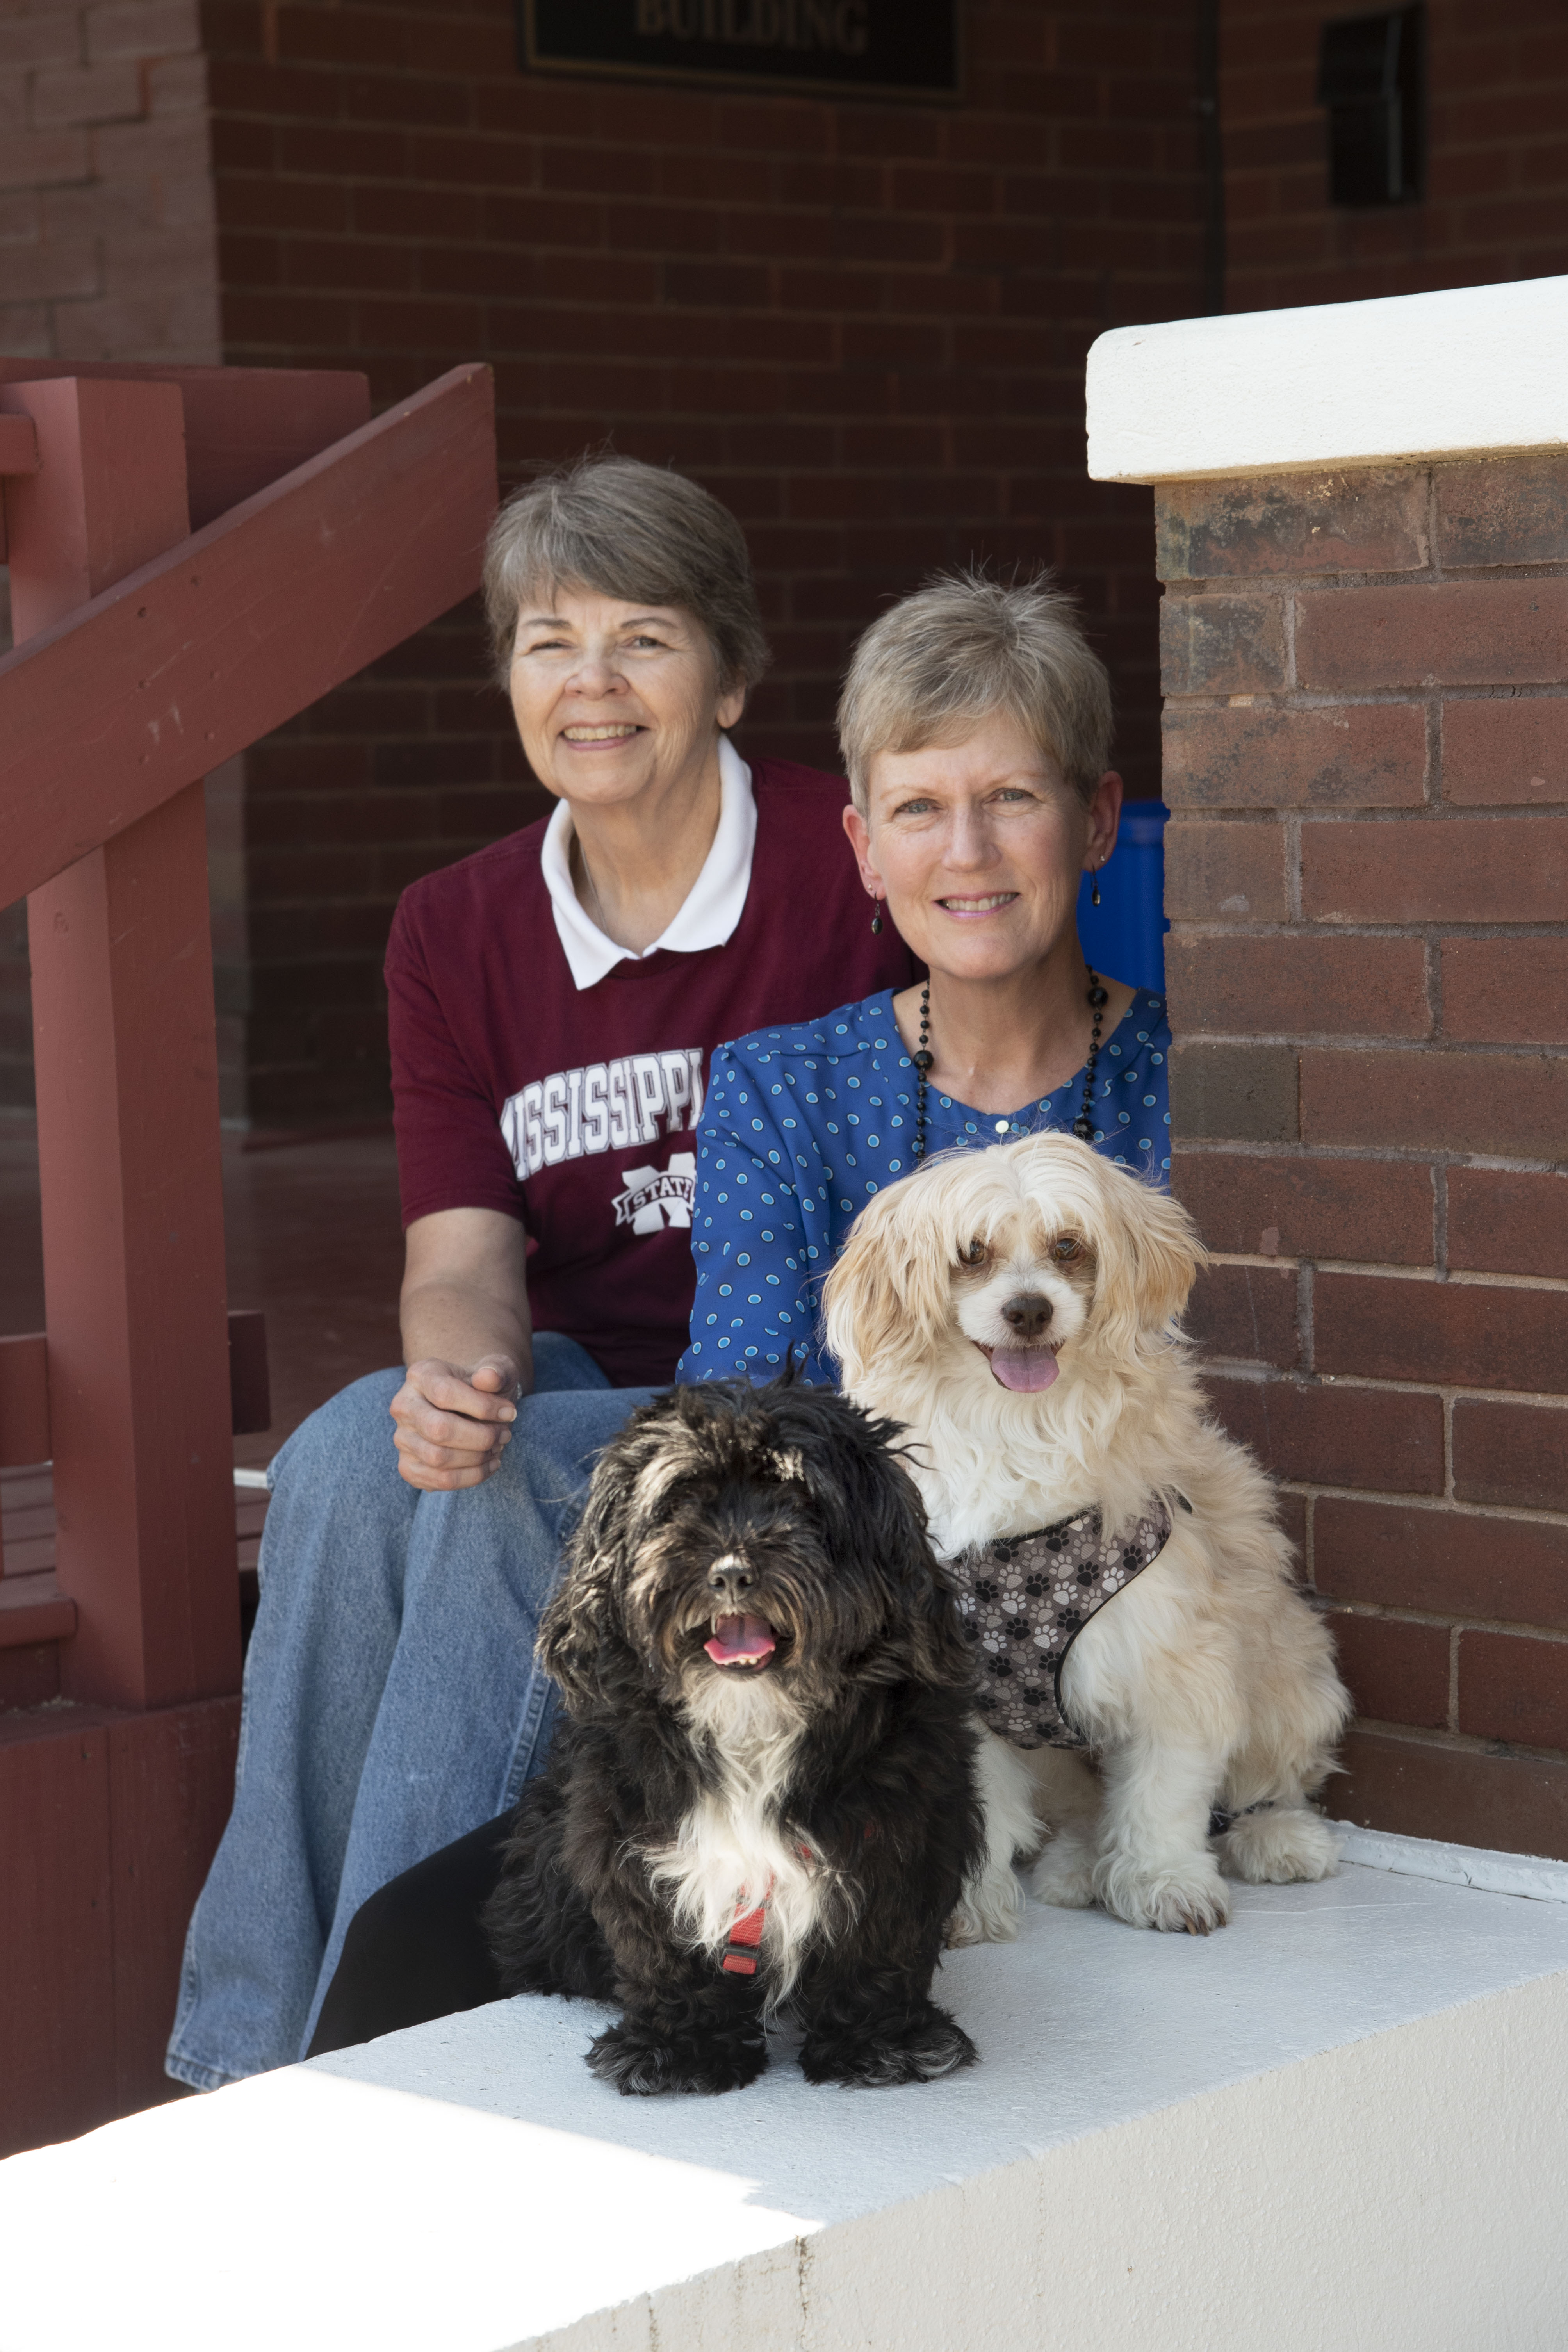 Two women pose with two dogs